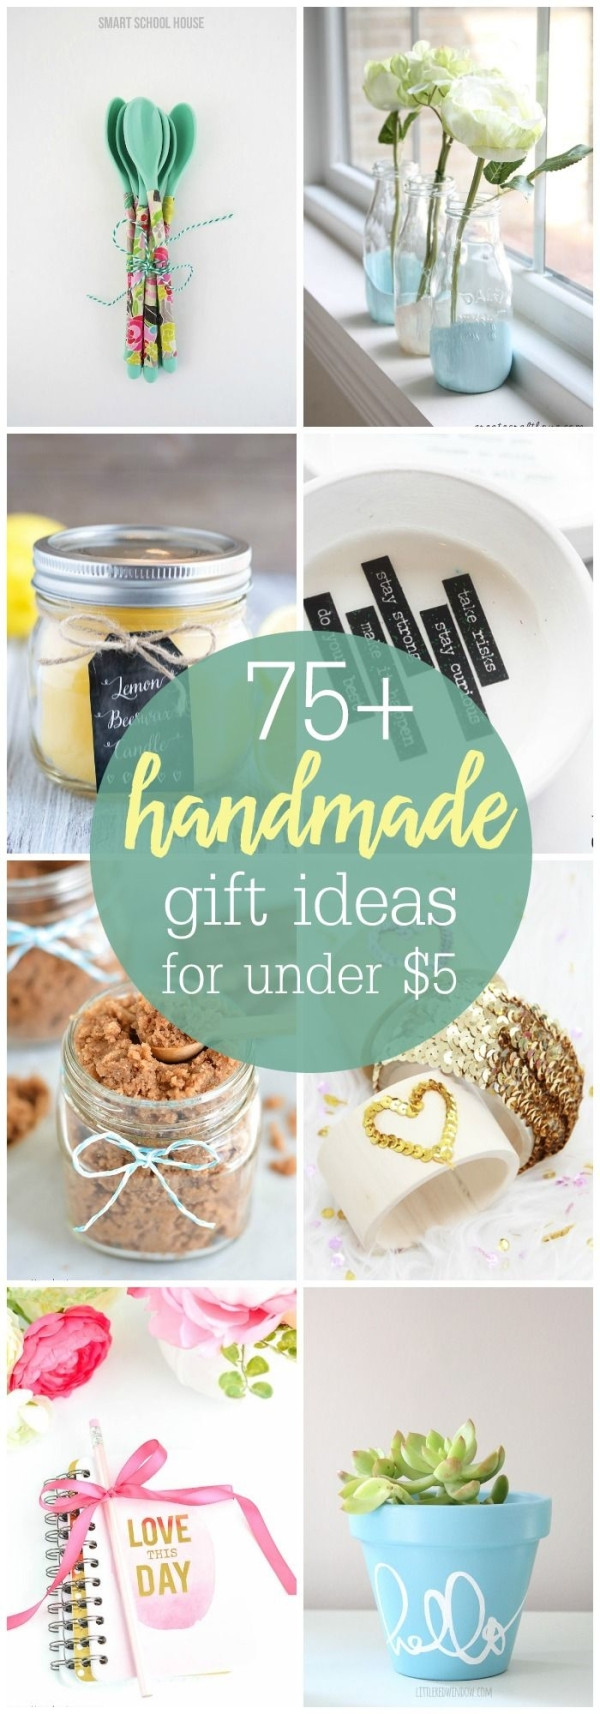 Christmas Gift Ideas Under $5
 A wonderful collection of 75 Handmade Gift Ideas that can